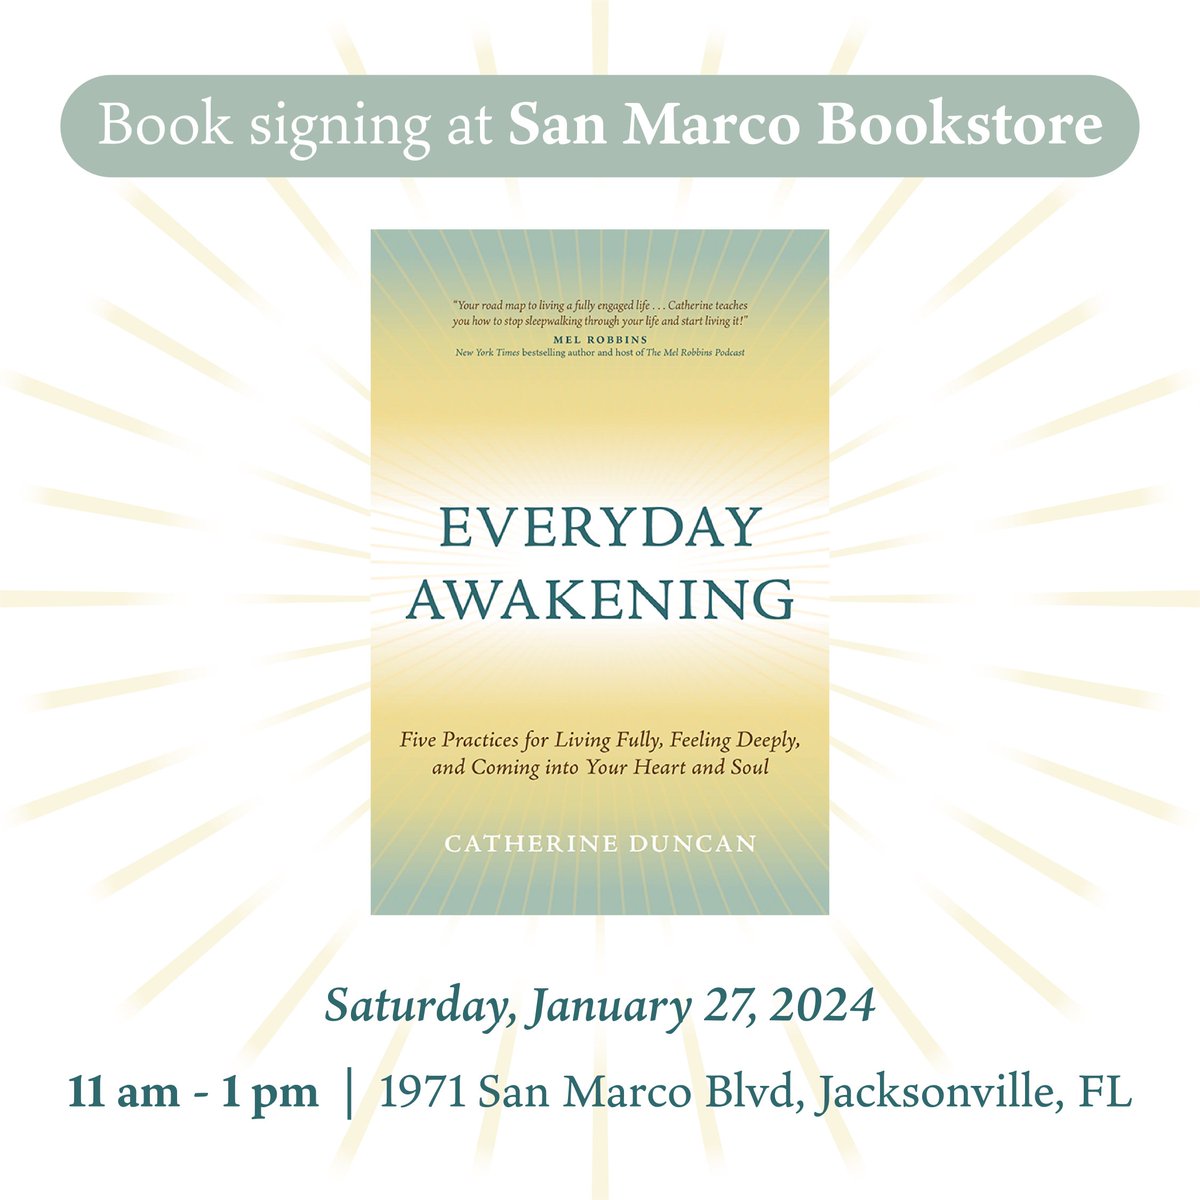 Join us tomorrow, Saturday, January 27th, as we welcome Catherine Duncan for a book signing. Her book, Everyday Awakening, is a great read for the new year, and everyone who's looking to live a fuller life. #book #signing #saturday #everyday #awakening #shopsmall